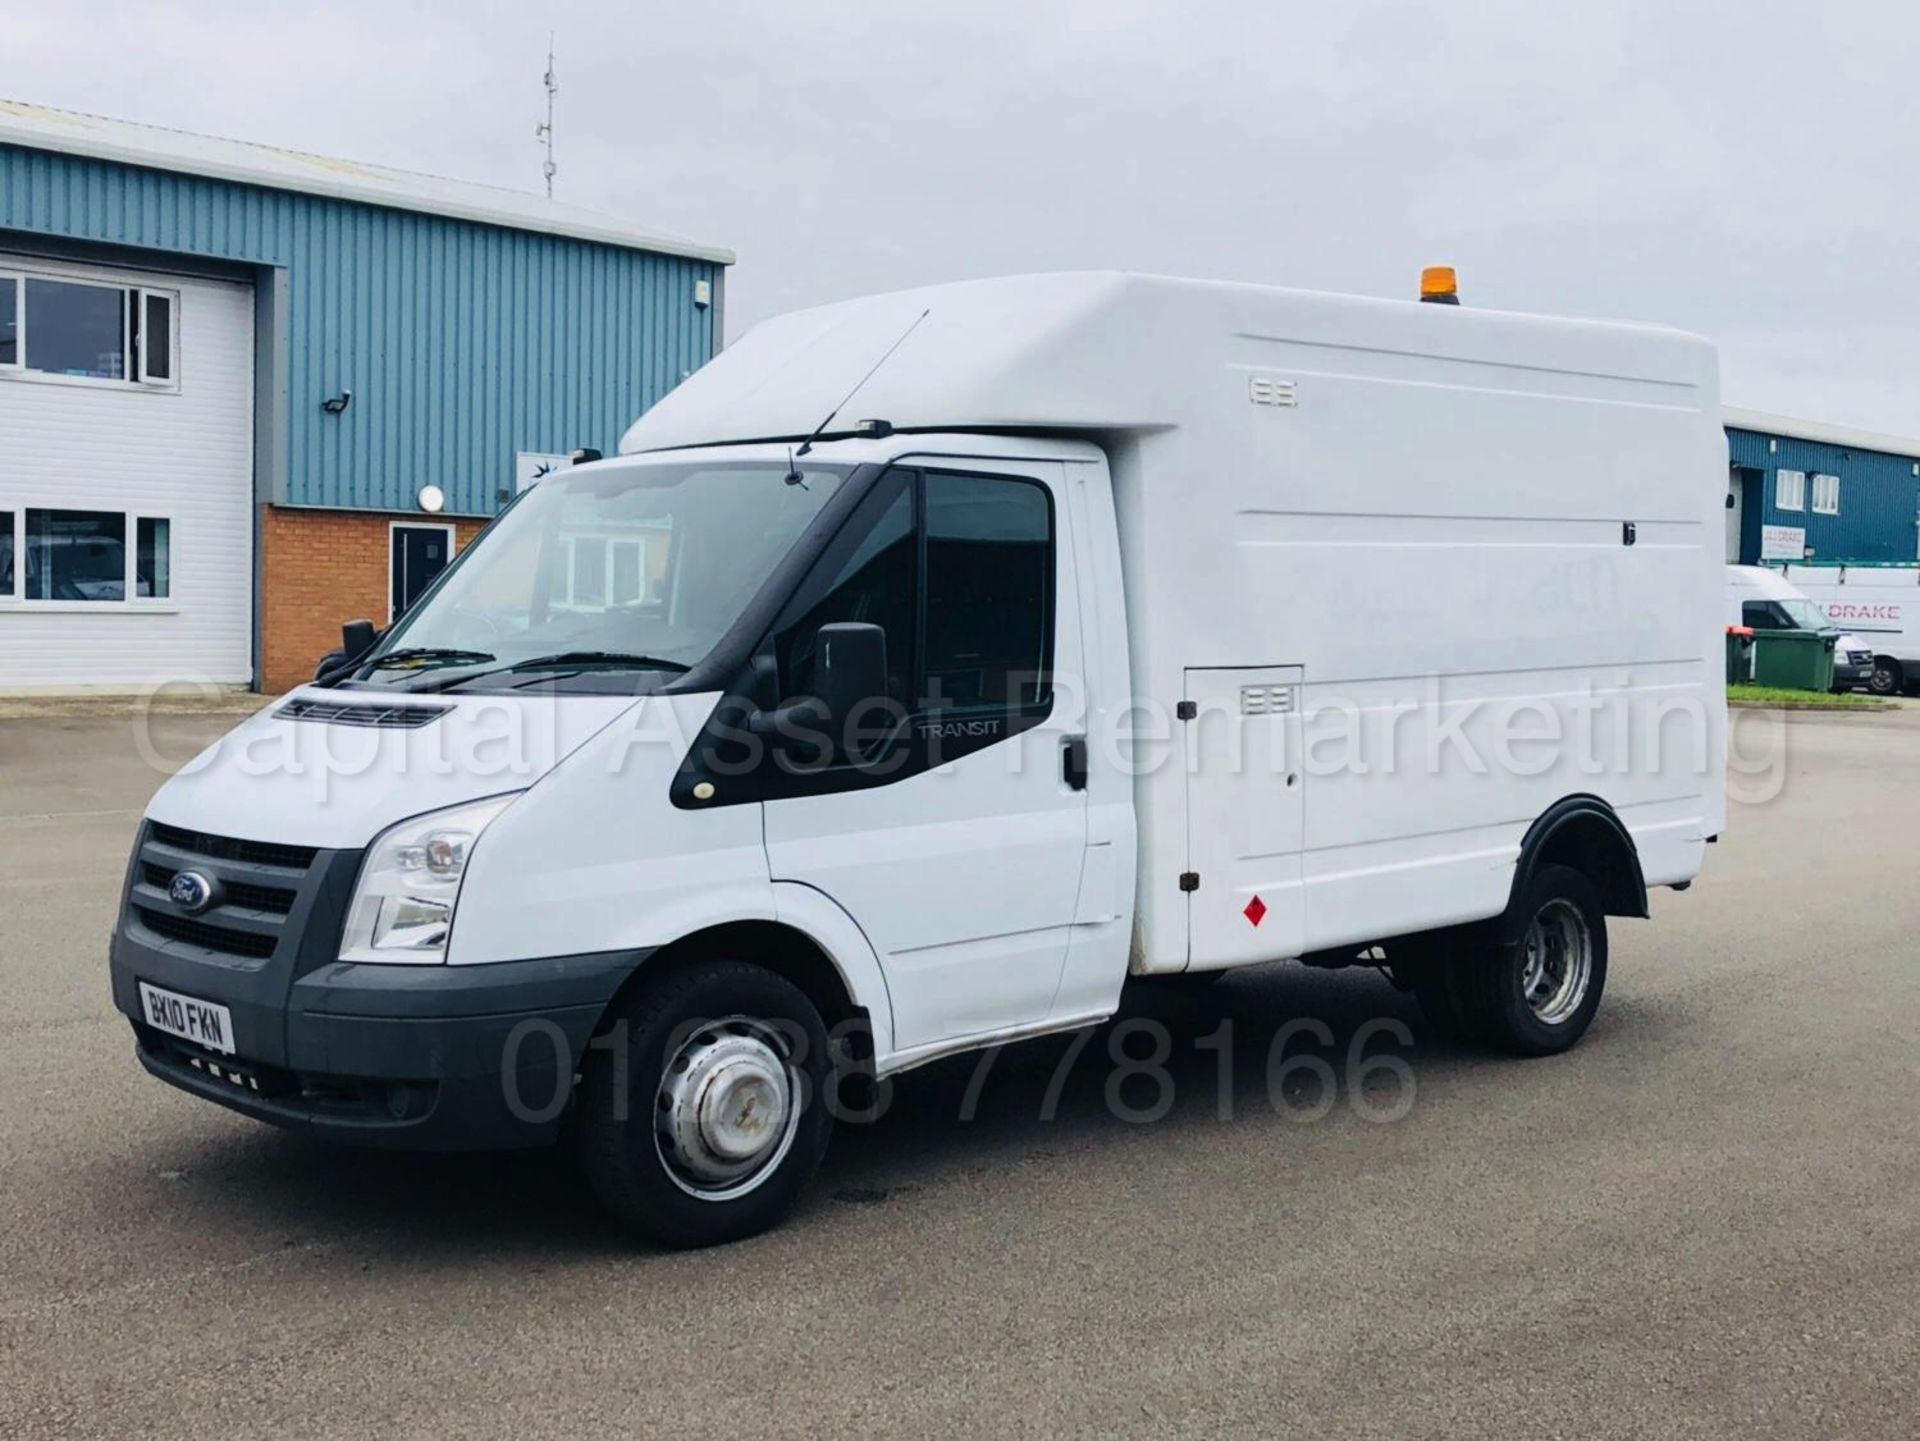 (On Sale) FORD TRANSIT 100 350 'BOX / LUTON VAN' (2010) '2.4 TDCI - 100 BHP' (1 COMPANY OWNER) - Image 4 of 29